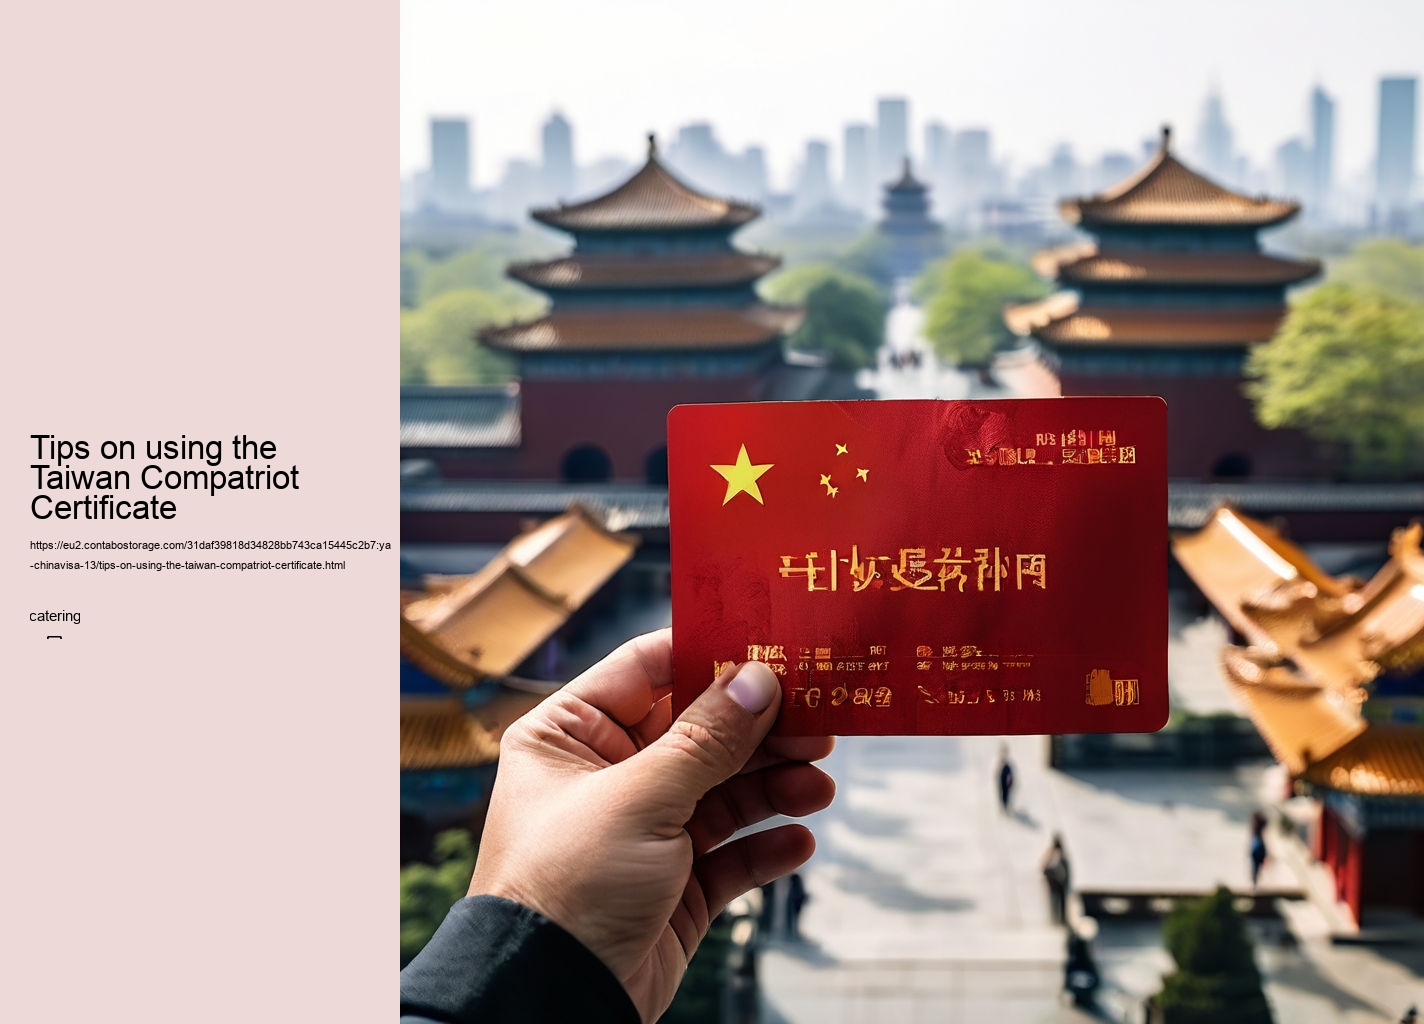 Tips on using the Taiwan Compatriot Certificate